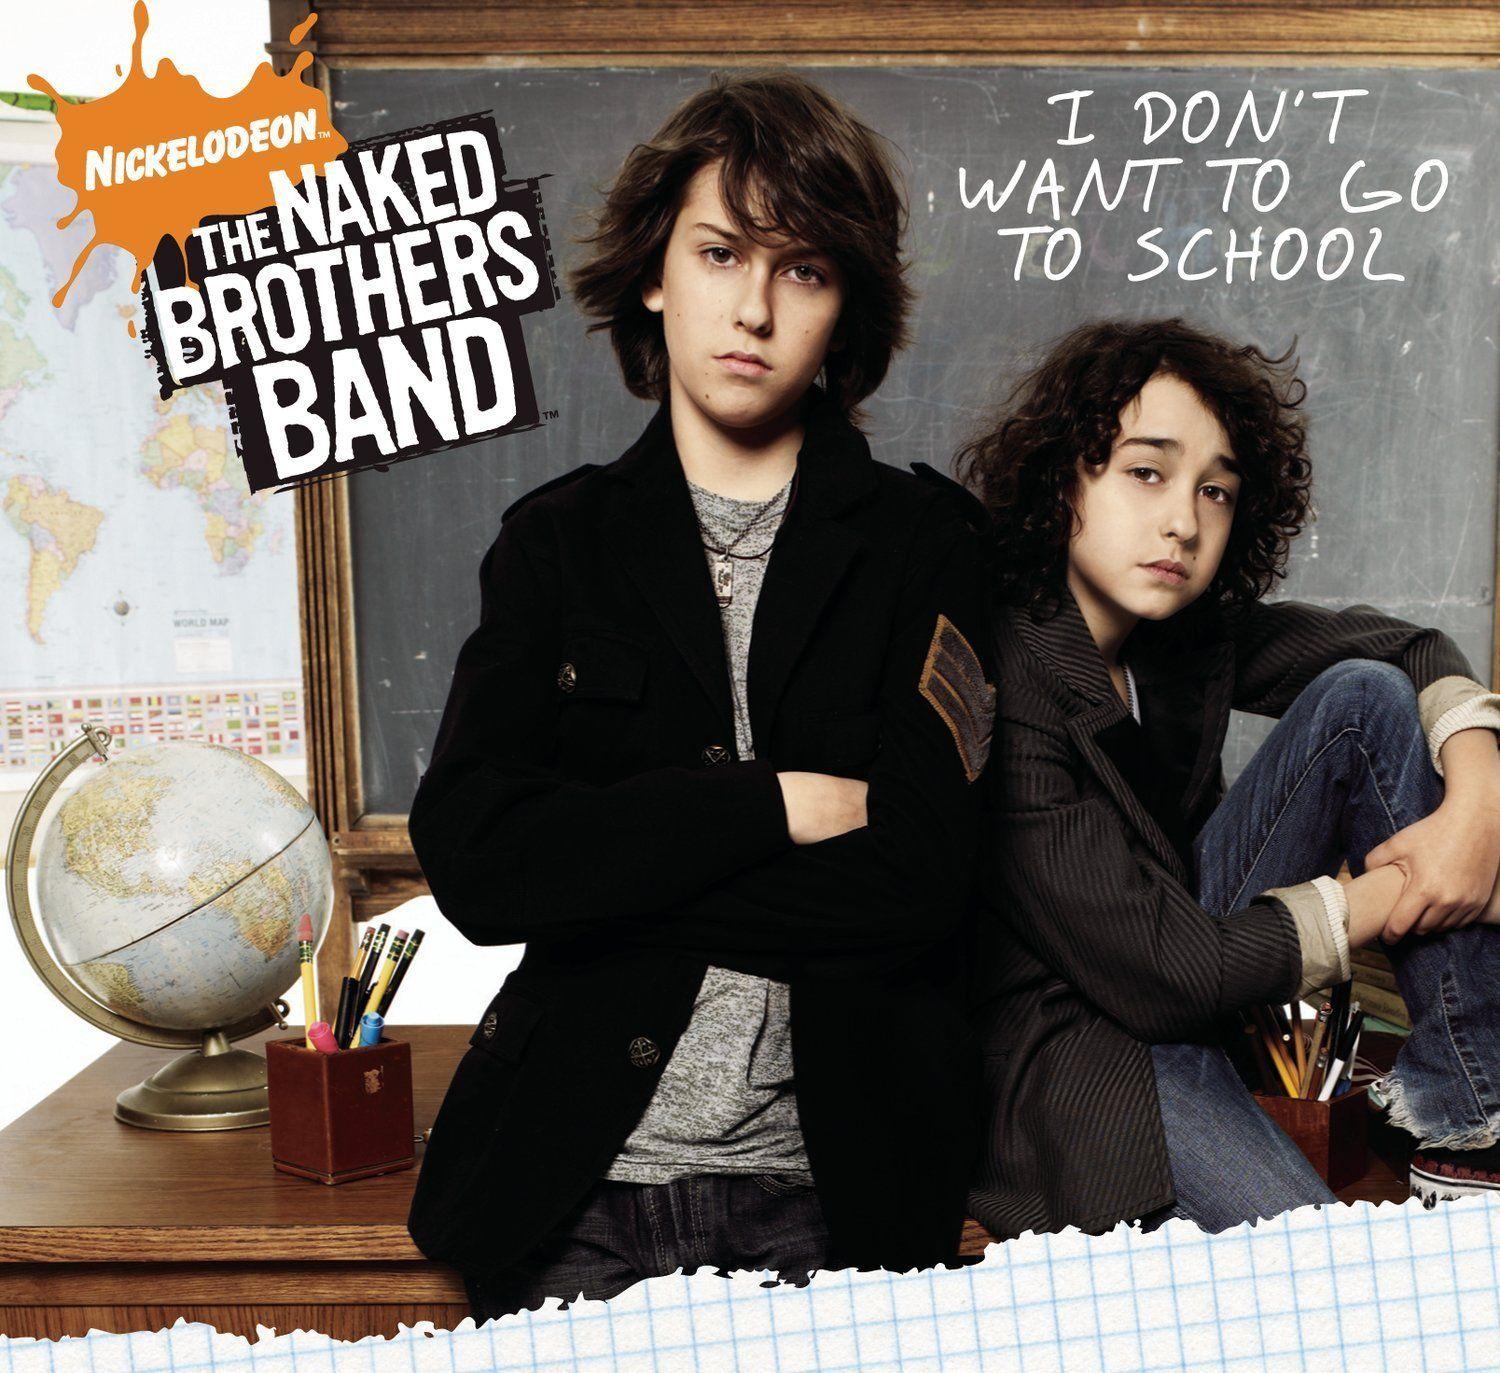 Are the naked brothers band a real bad